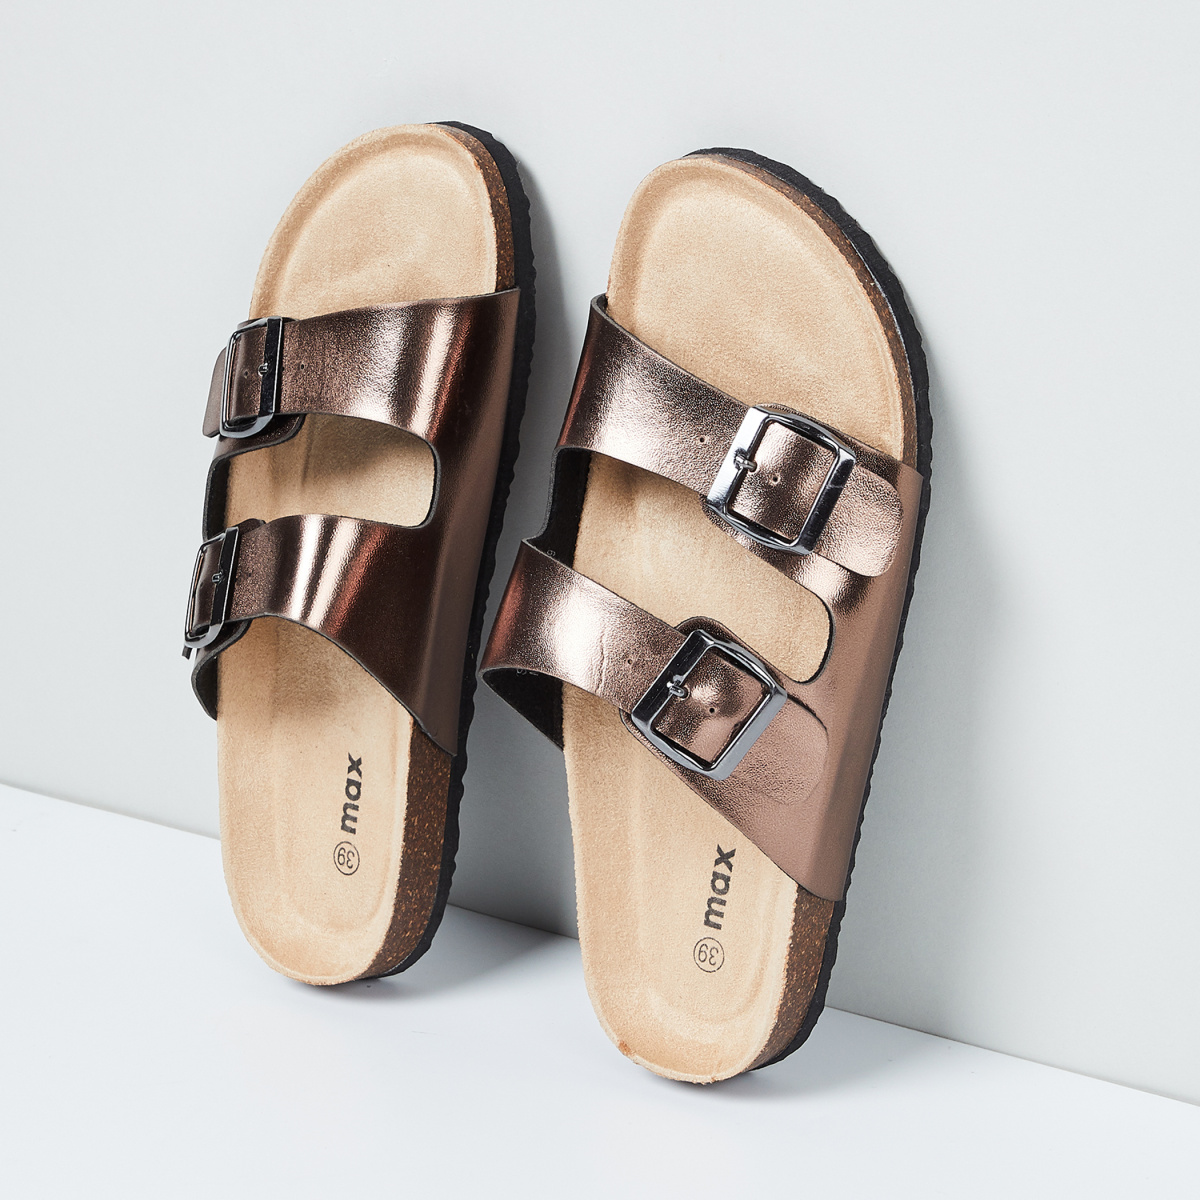 MAX Buckled Strap Sandals